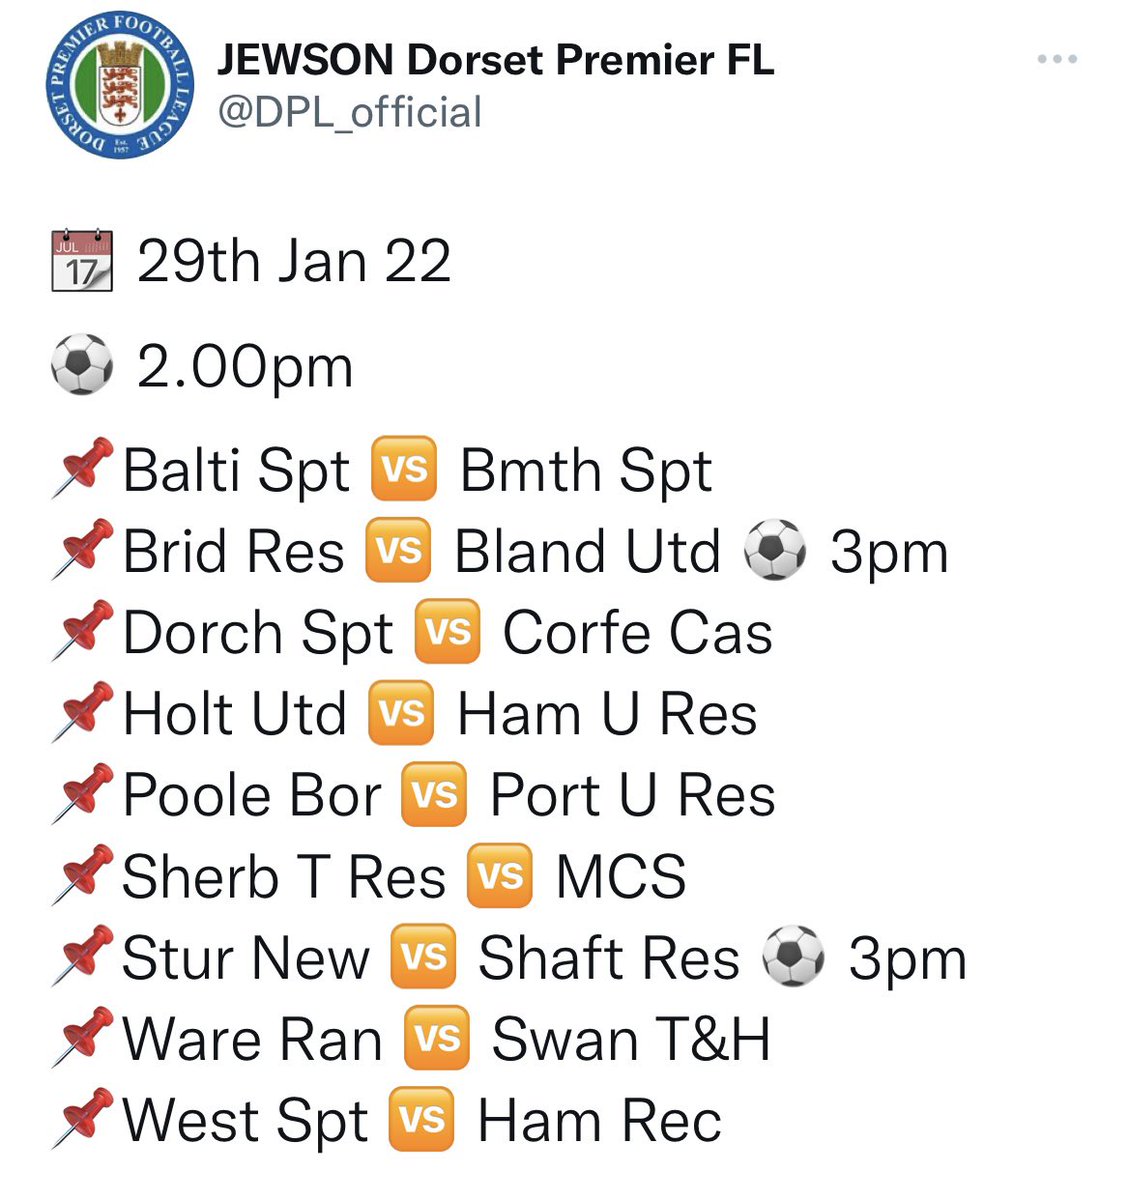 Exactly this 👏🏻 In the Bmth, Xch or Poole area, we have home games at @HamworthyUtdFC or @verwoodtownfc for a taste of @nls_wessex action. Alternatively, a feast of @DPL_official matches are available👇🏻 You’ve literally nothing to lose (apart from less than £10 to get in 😉)